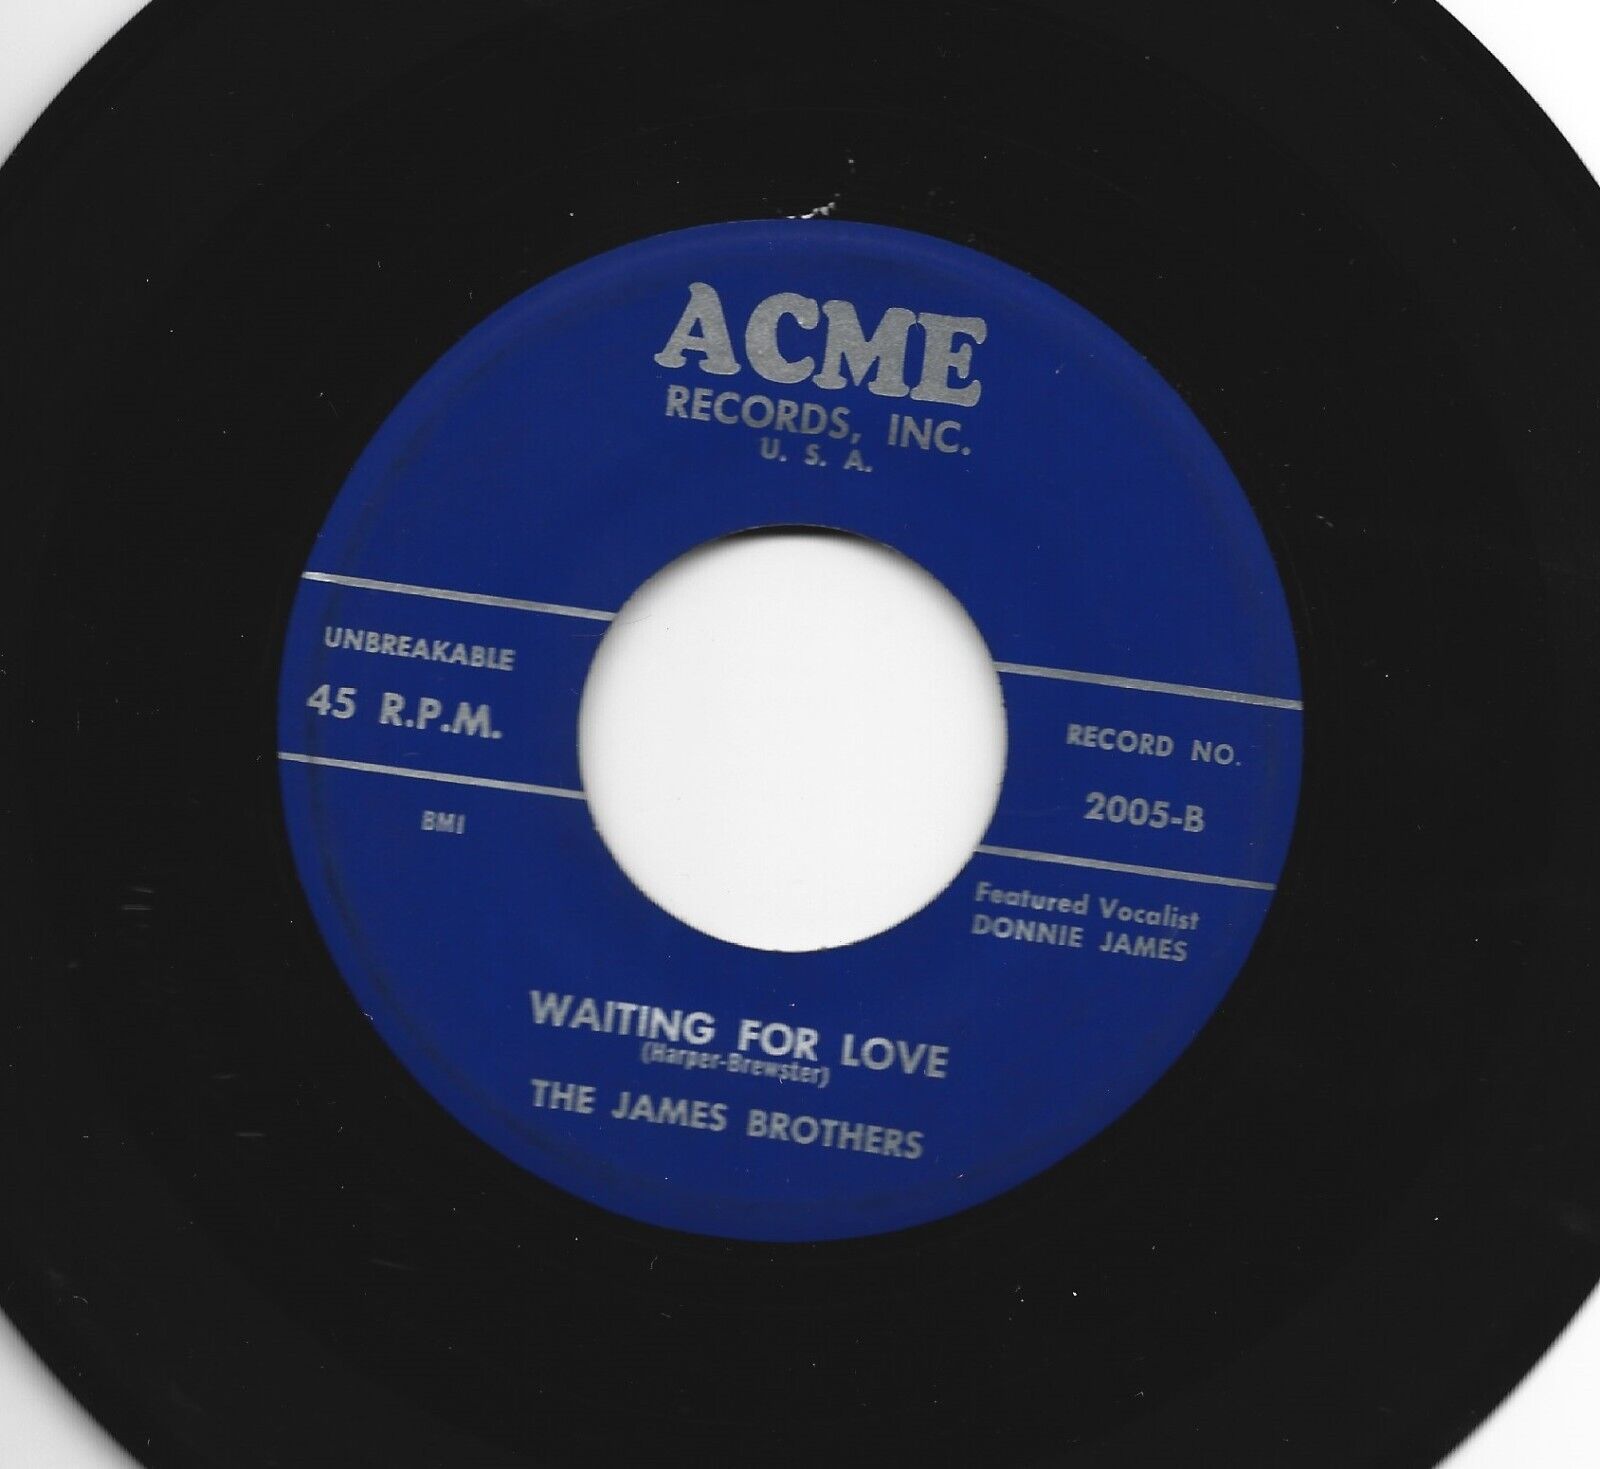 TEEN bw/ COUNTRY 45 - JAMES BROTHERS - WAITING FOR LOVE - HEAR -1959 KY ACME